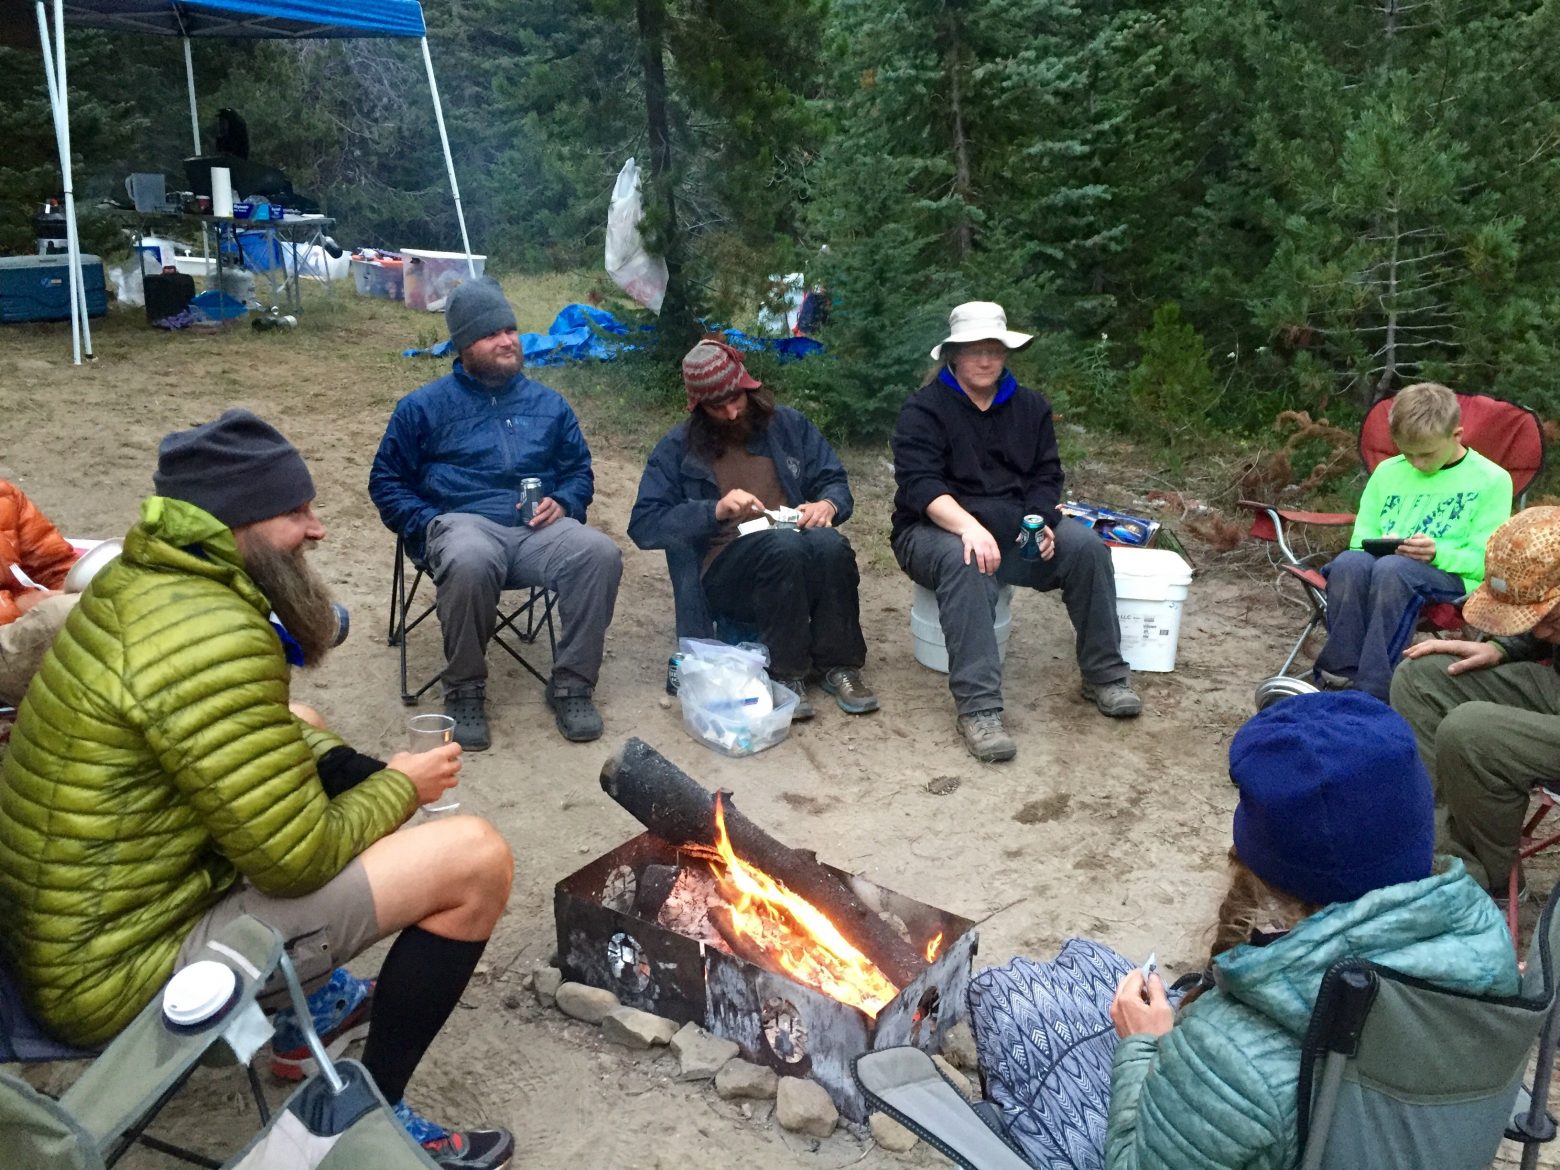 PCT thru-hikers gathering around a fire at trail magic